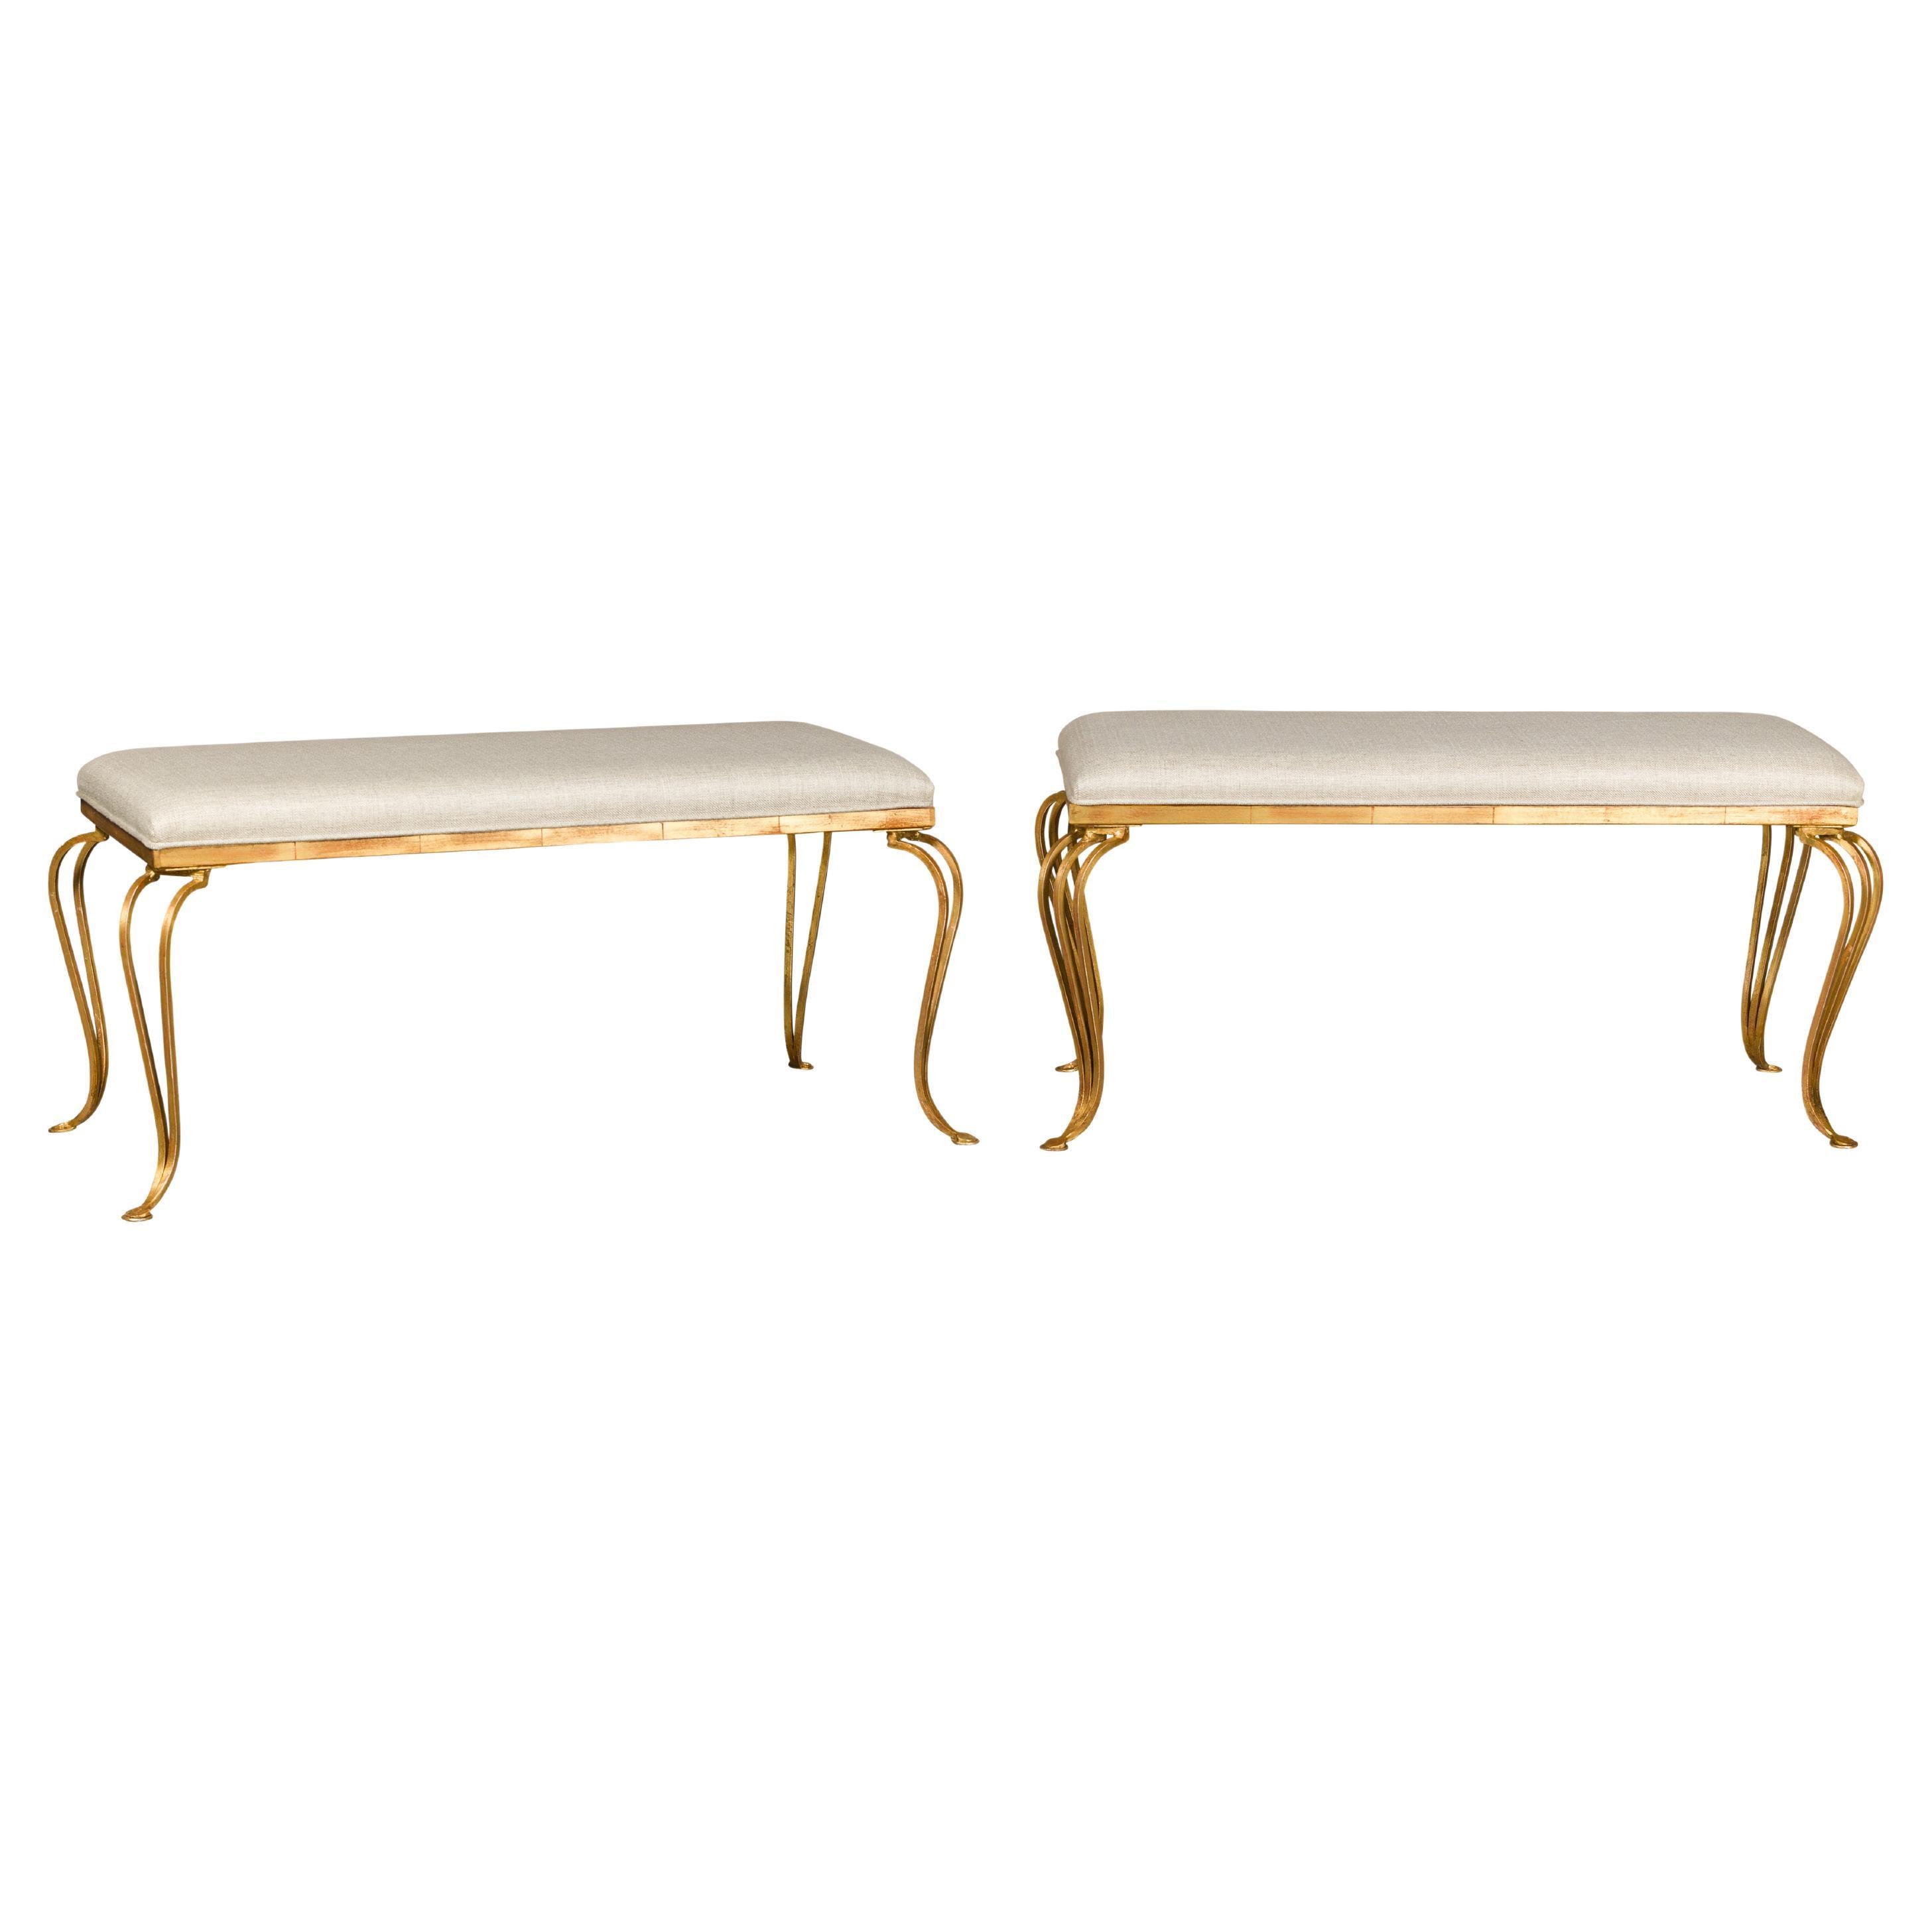 Midcentury French Gilt Metal Benches with Cabriole Legs and Upholstery, a Pair